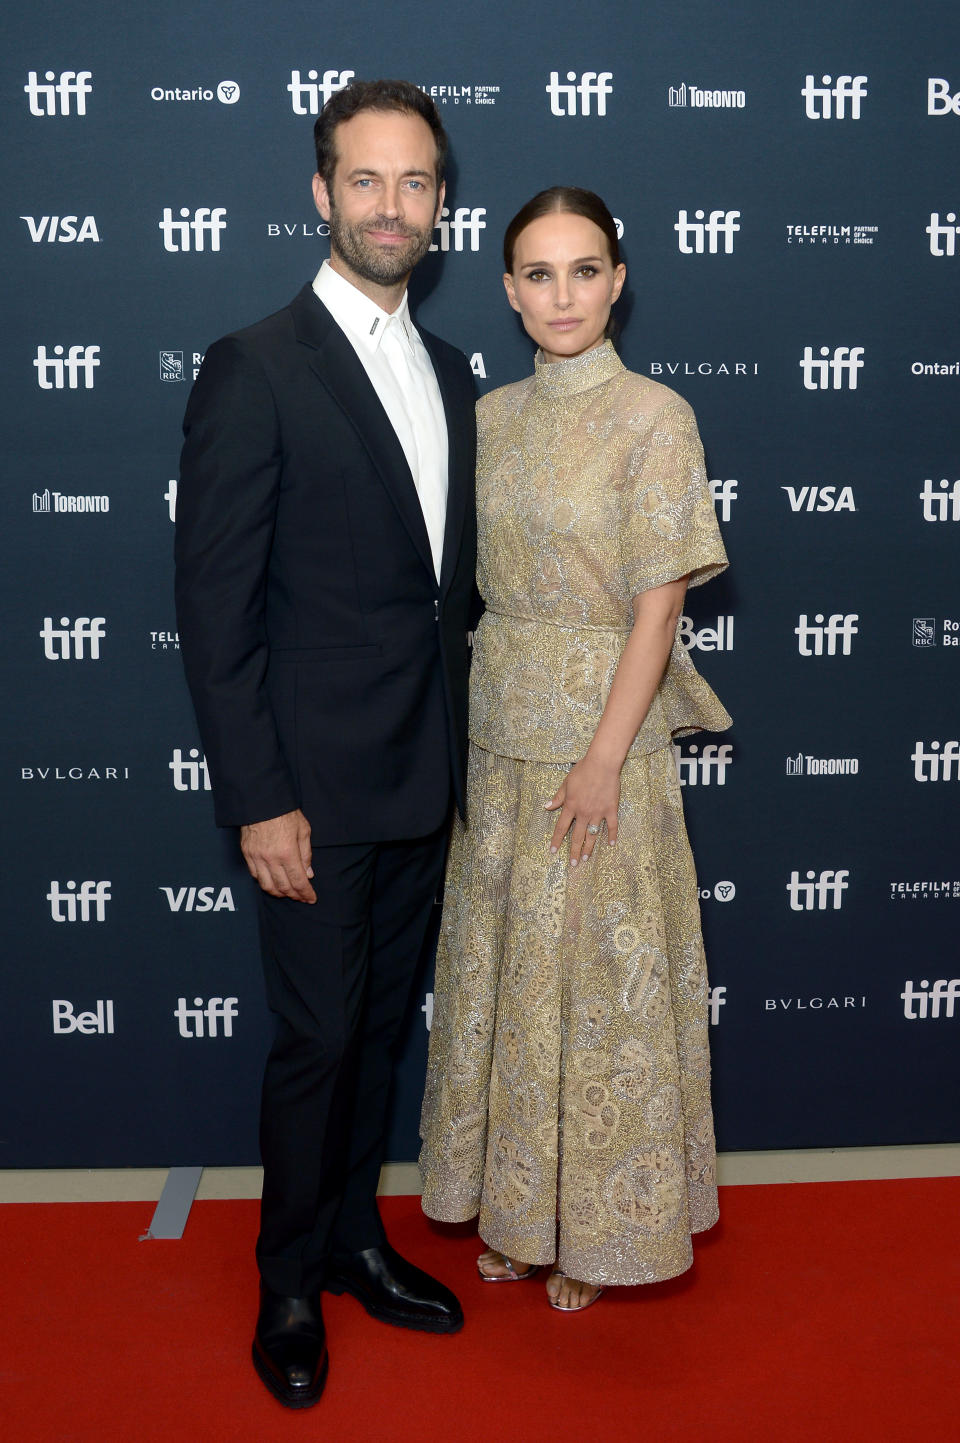 TORONTO, ONTARIO - SEPTEMBER 11: (L-R) Benjamin Millepied and Natalie Portman attends the "Carmen" Premiere during the 2022 Toronto International Film Festival at TIFF Bell Lightbox on September 11, 2022 in Toronto, Ontario. (Photo by Unique Nicole/Getty Images)